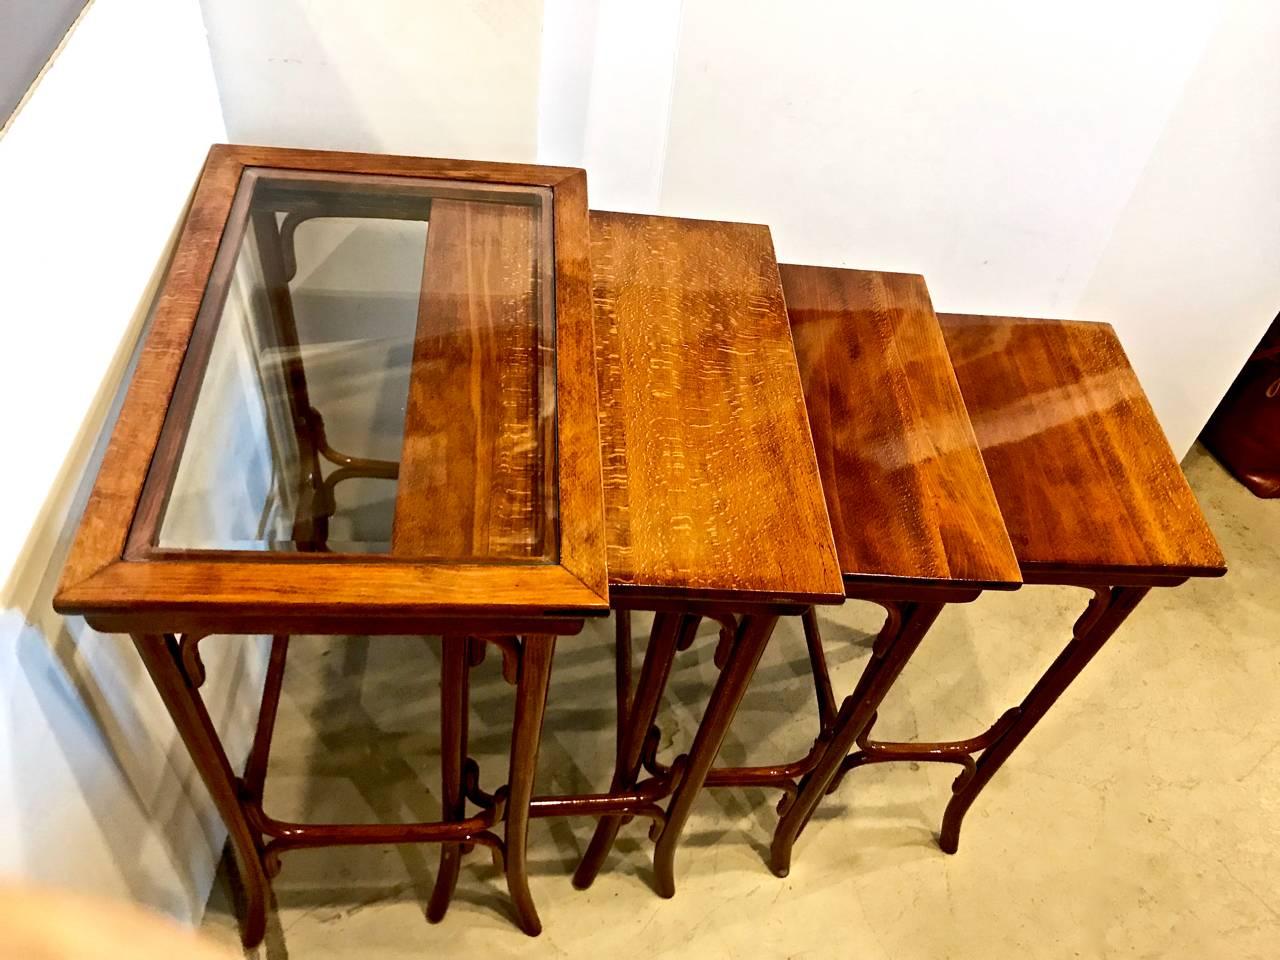 This is a beautiful set of quartetto or four nesting tables in the style of Thonet. The tables have been recently refinished and are in excellent condition. The beveled glass insert on the largest table is a unusual feature leading to the